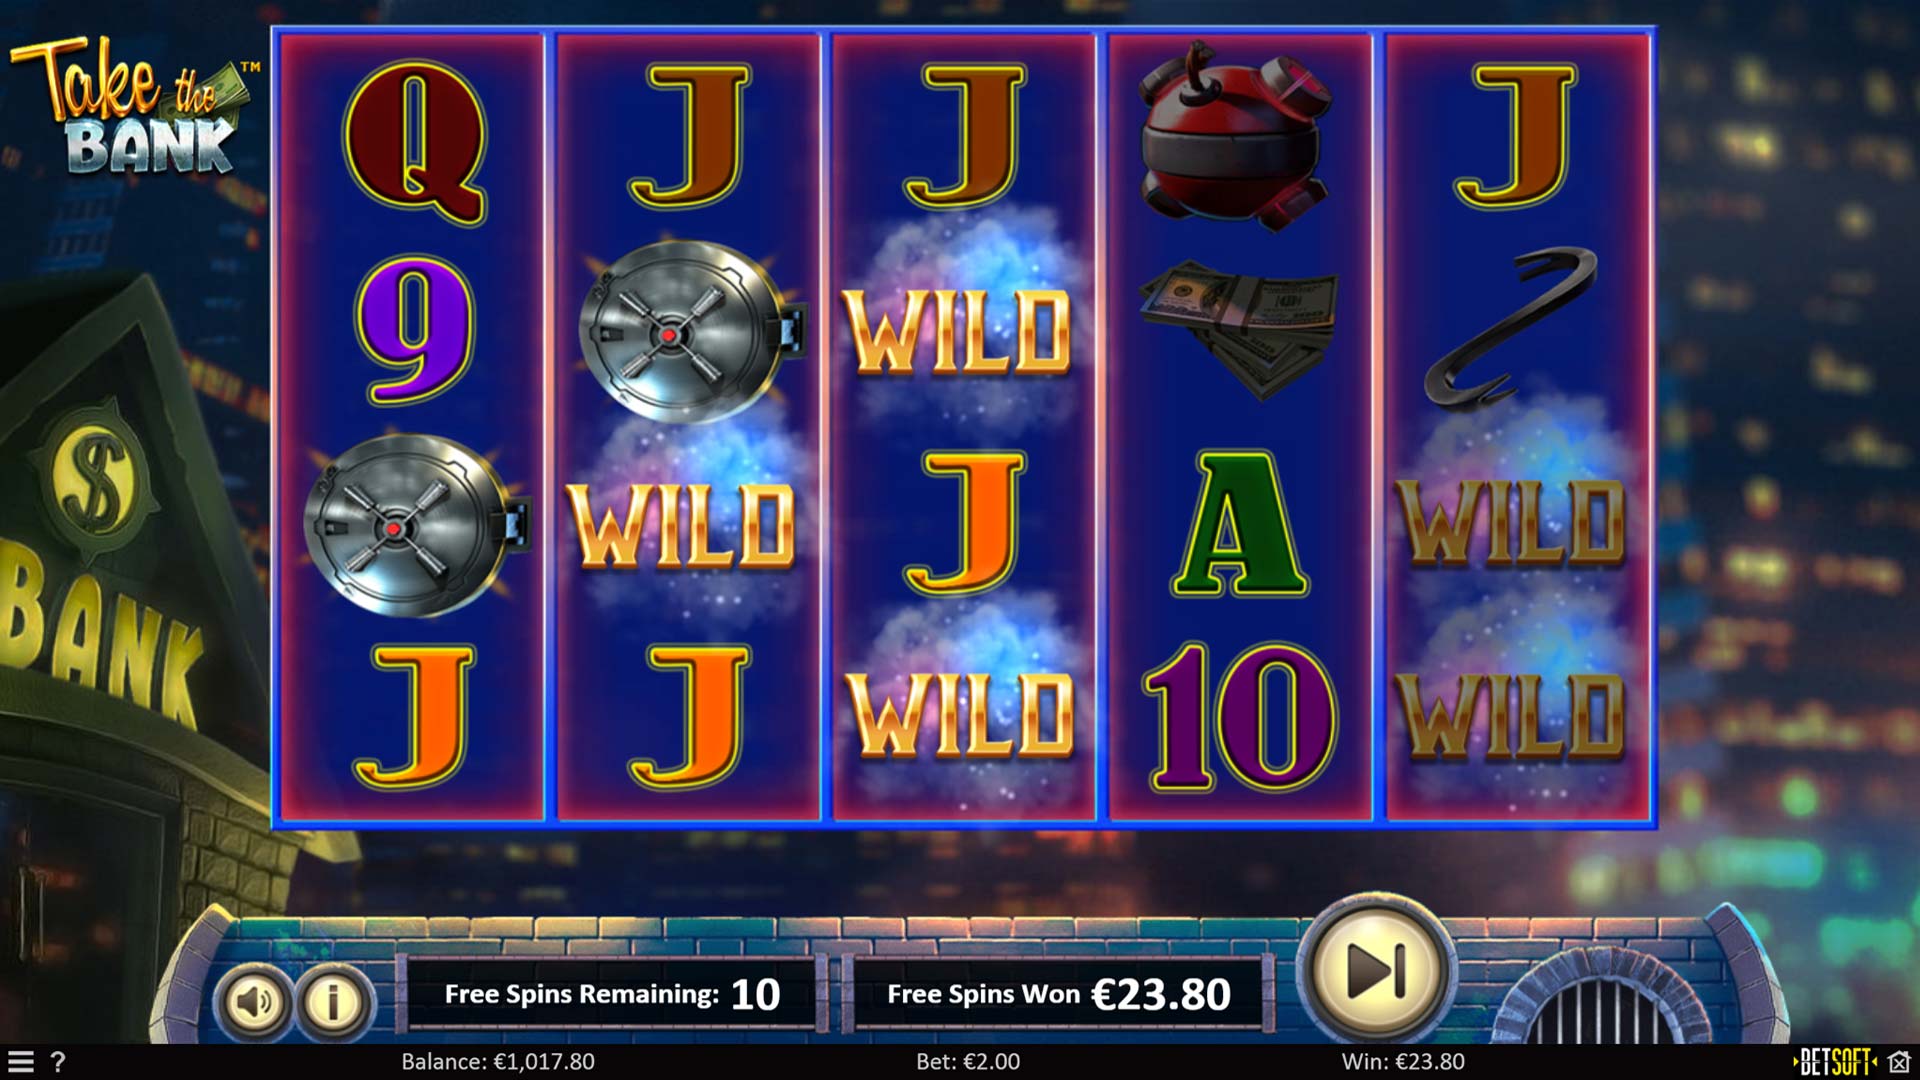 Take The Bank - Free Spins